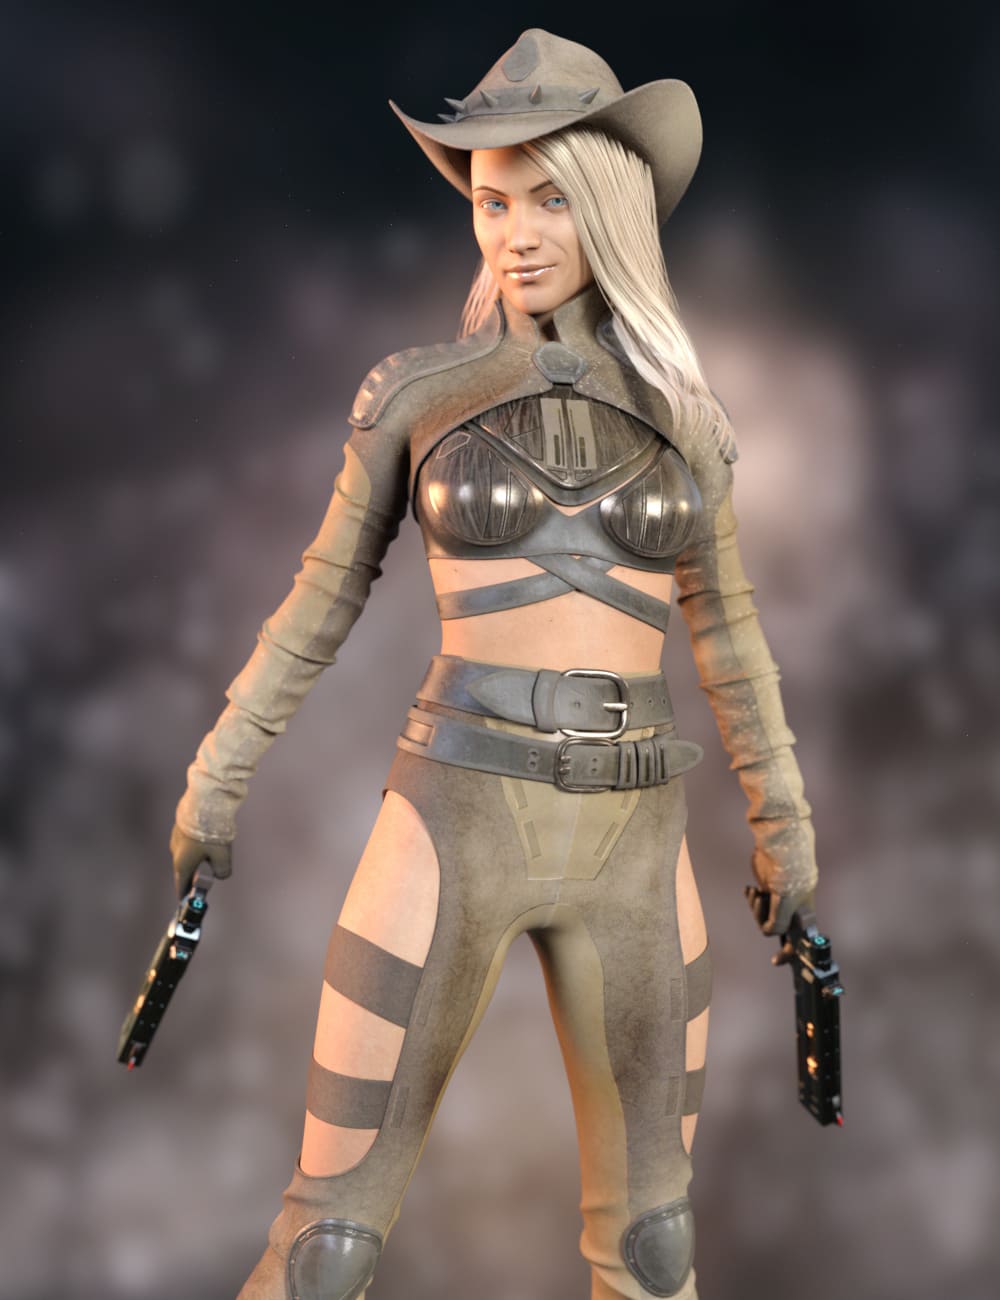 West Sci-Fi Outfit for Genesis 8.1 Females_DAZ3D下载站